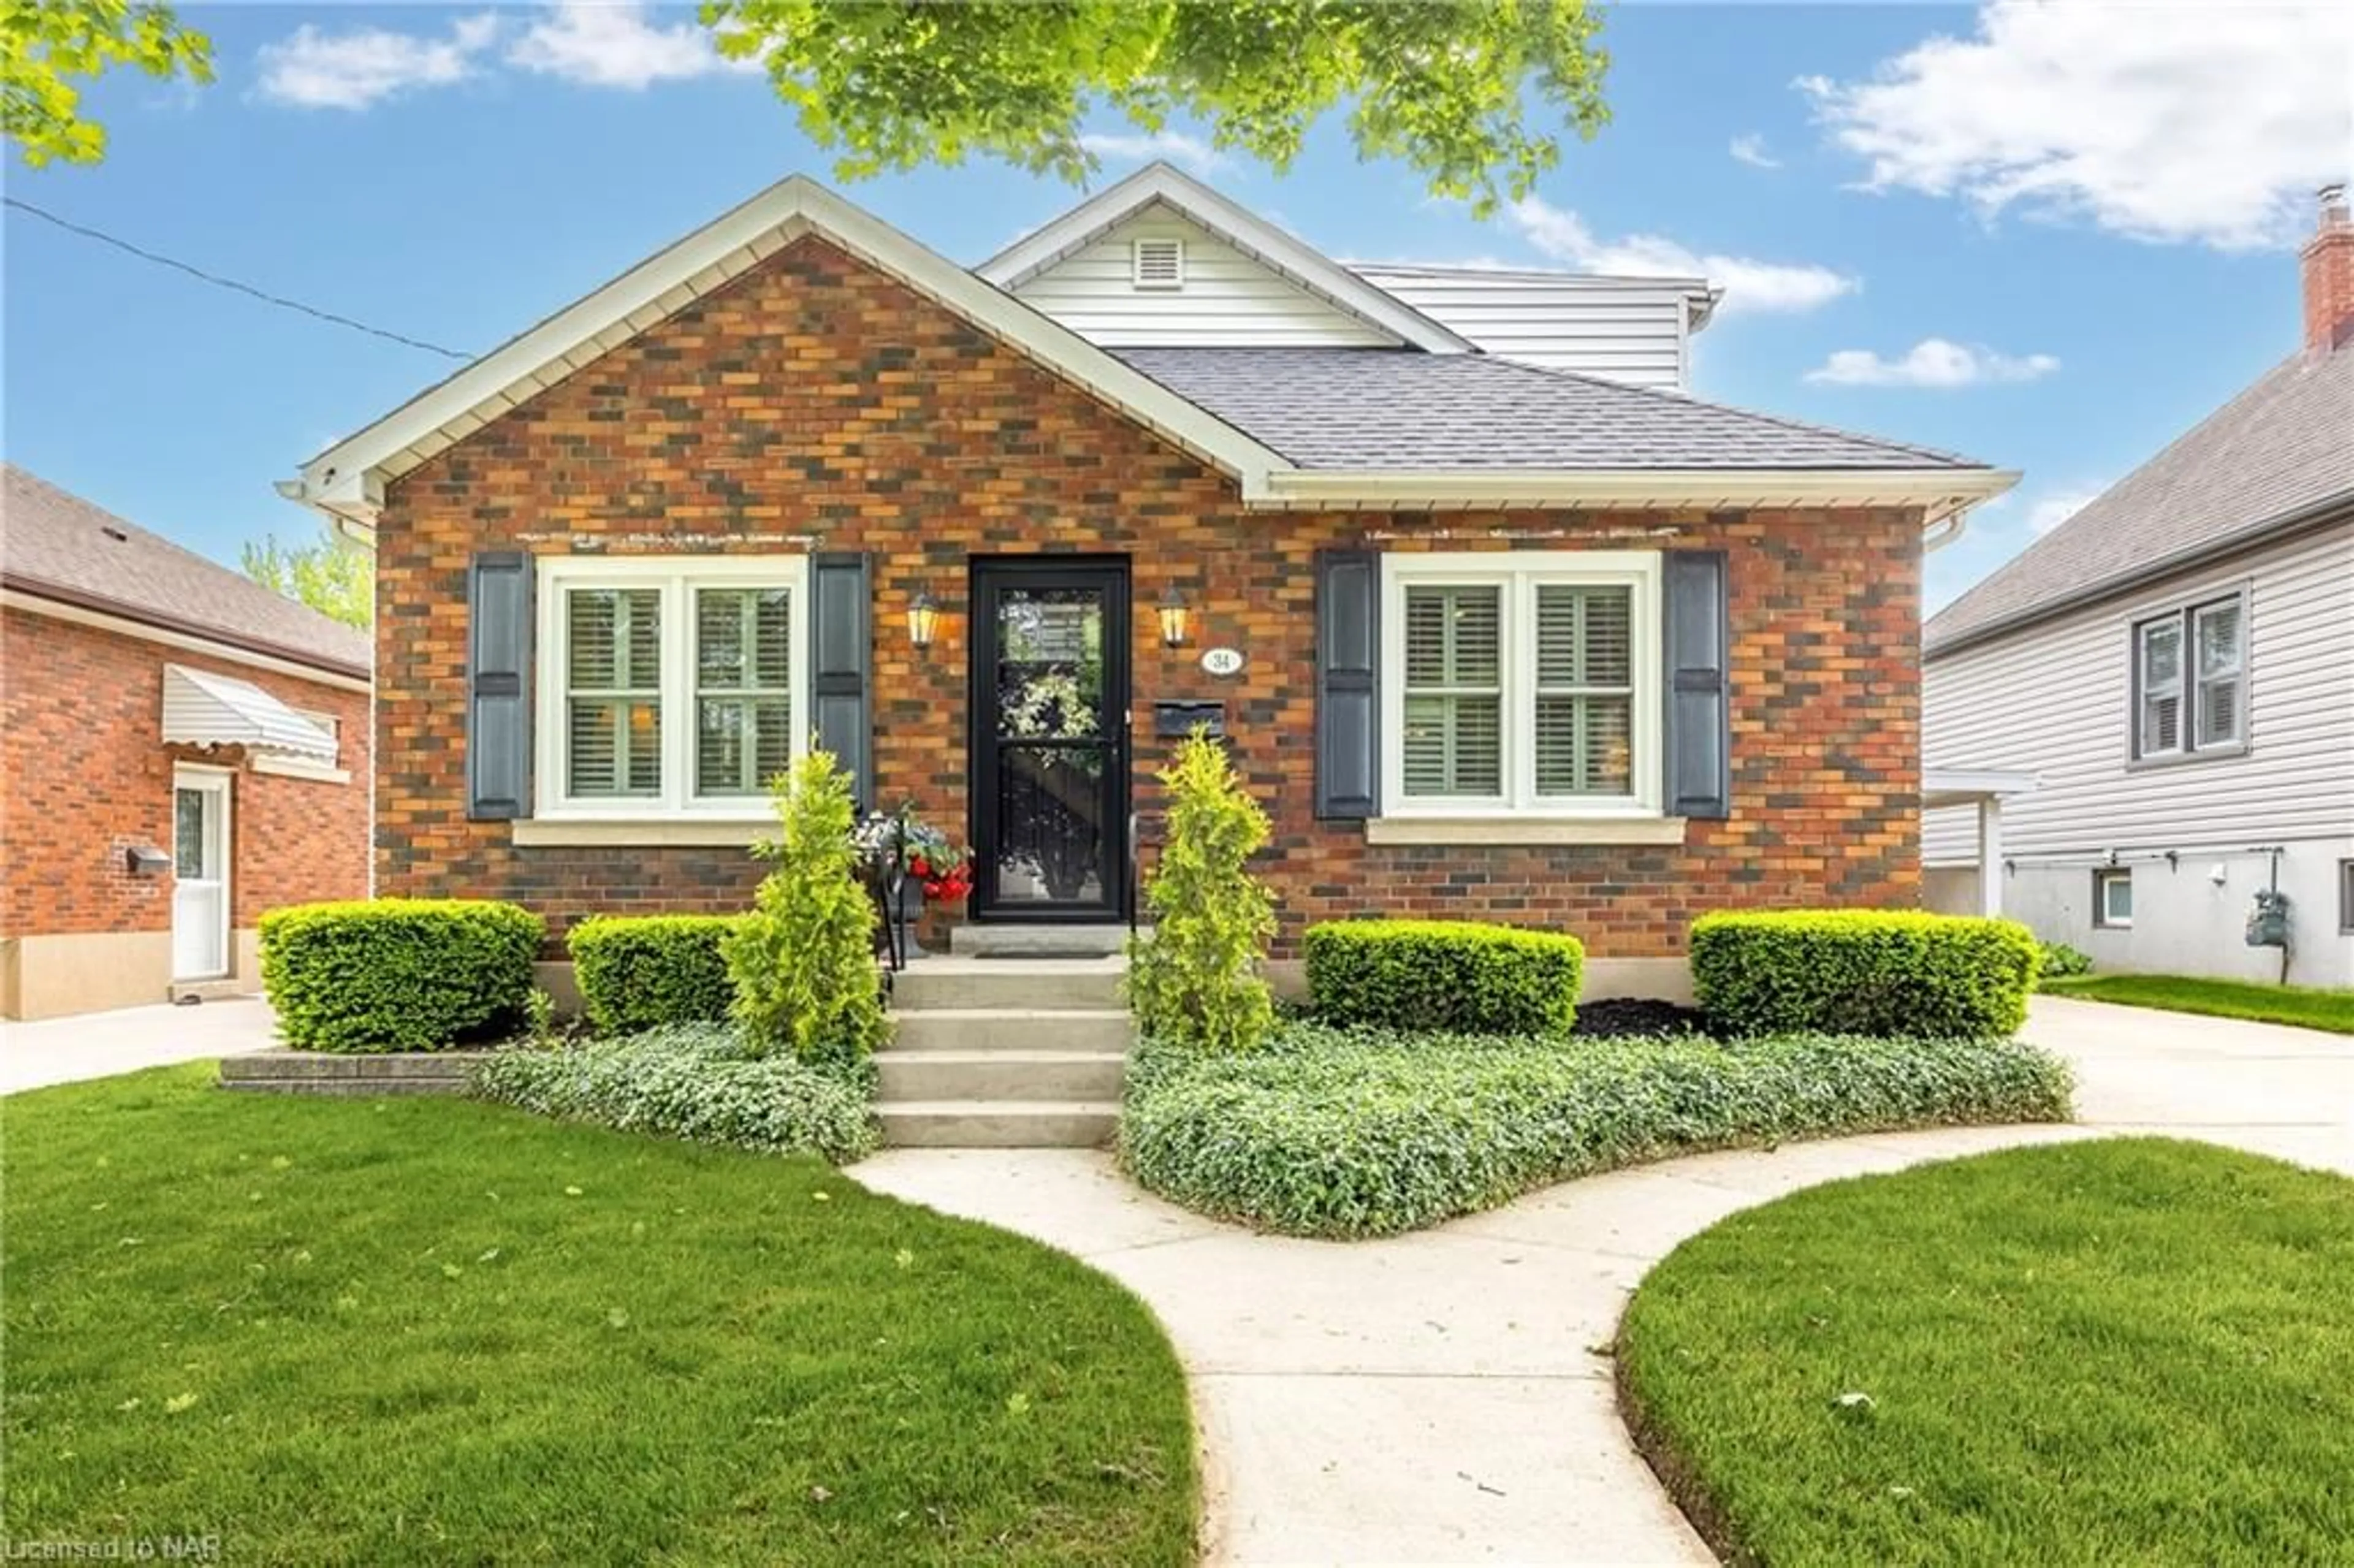 Home with brick exterior material for 34 Rolls Ave, St. Catharines Ontario L2N 1W1